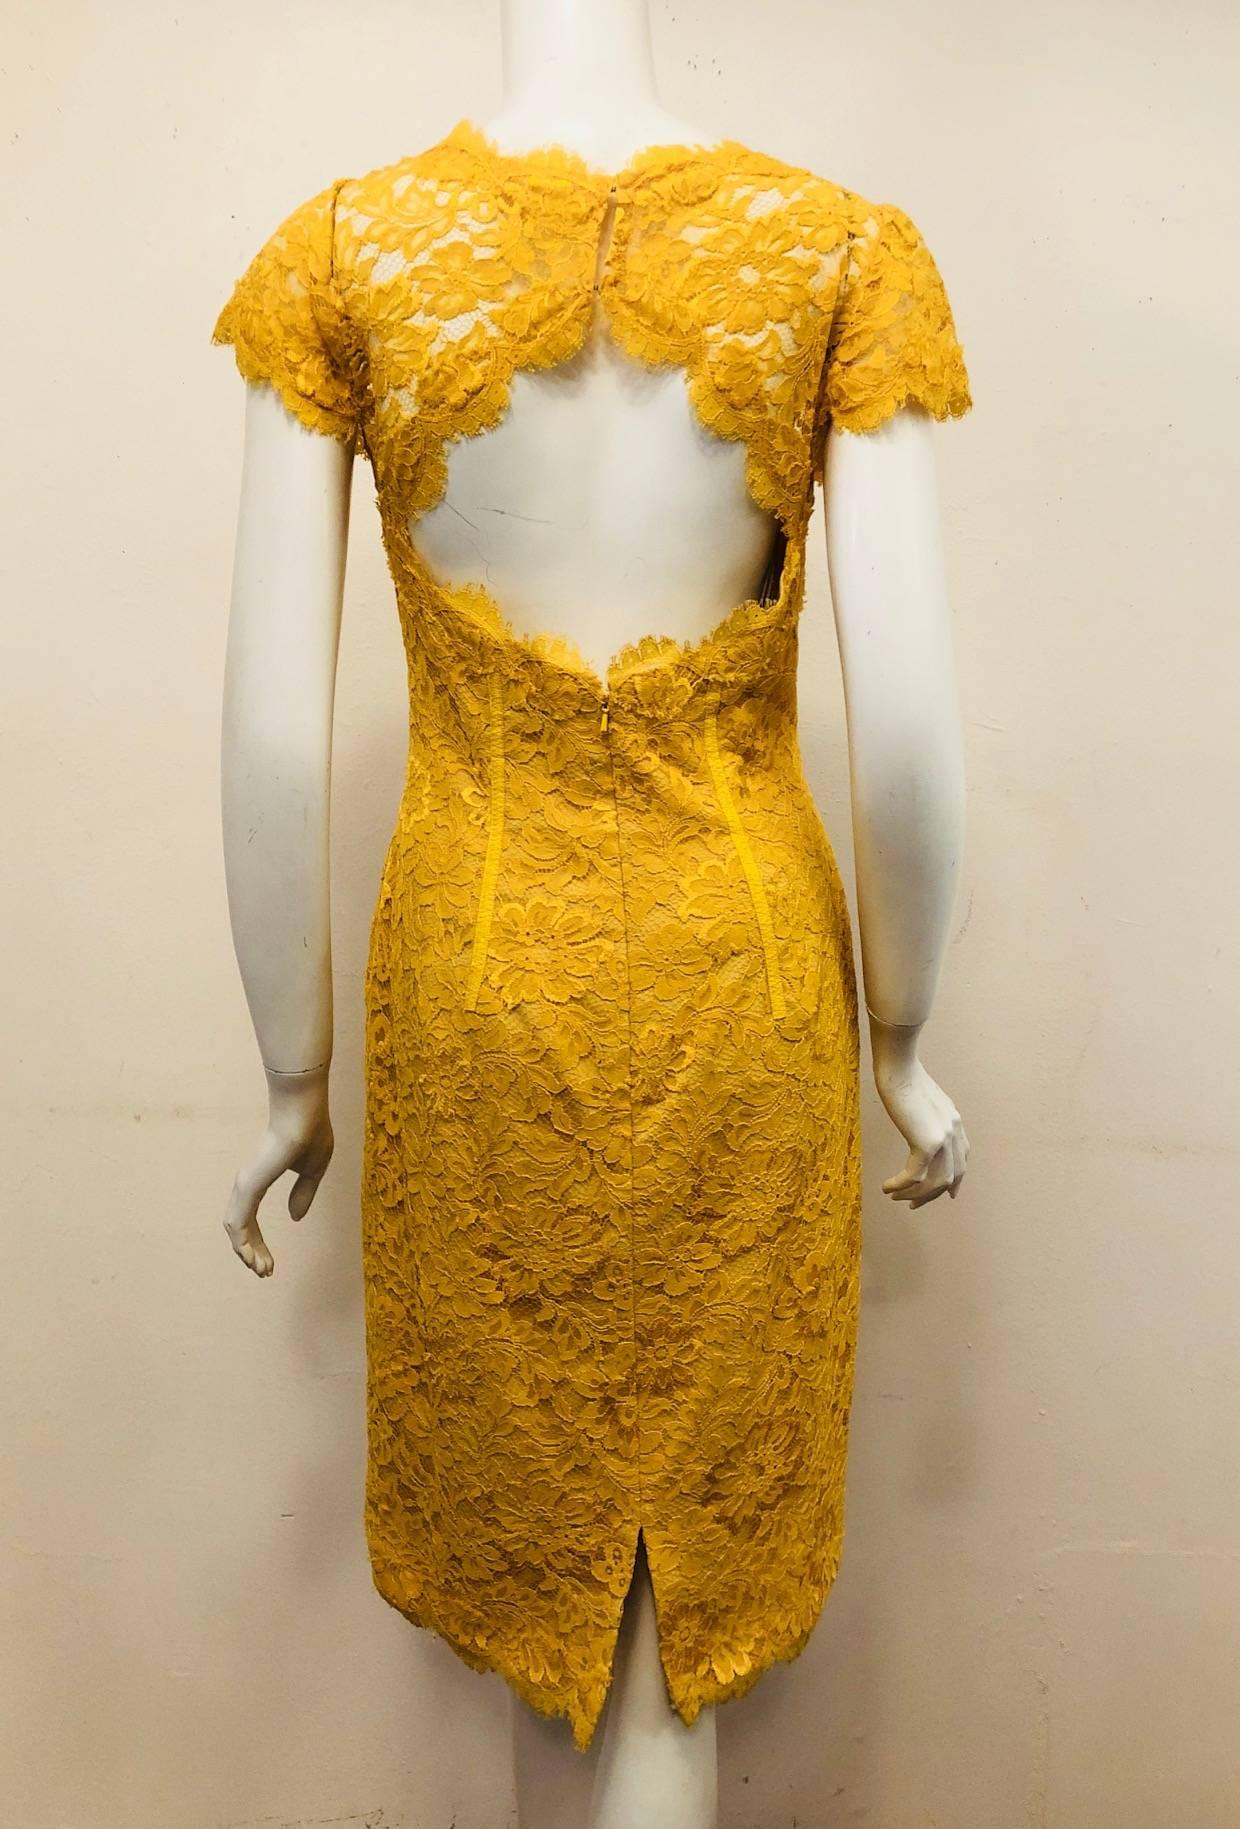 Monique Lhuiller Lemon Amber Lace Open Back Dress With Cap Sleeve In Excellent Condition For Sale In Palm Beach, FL